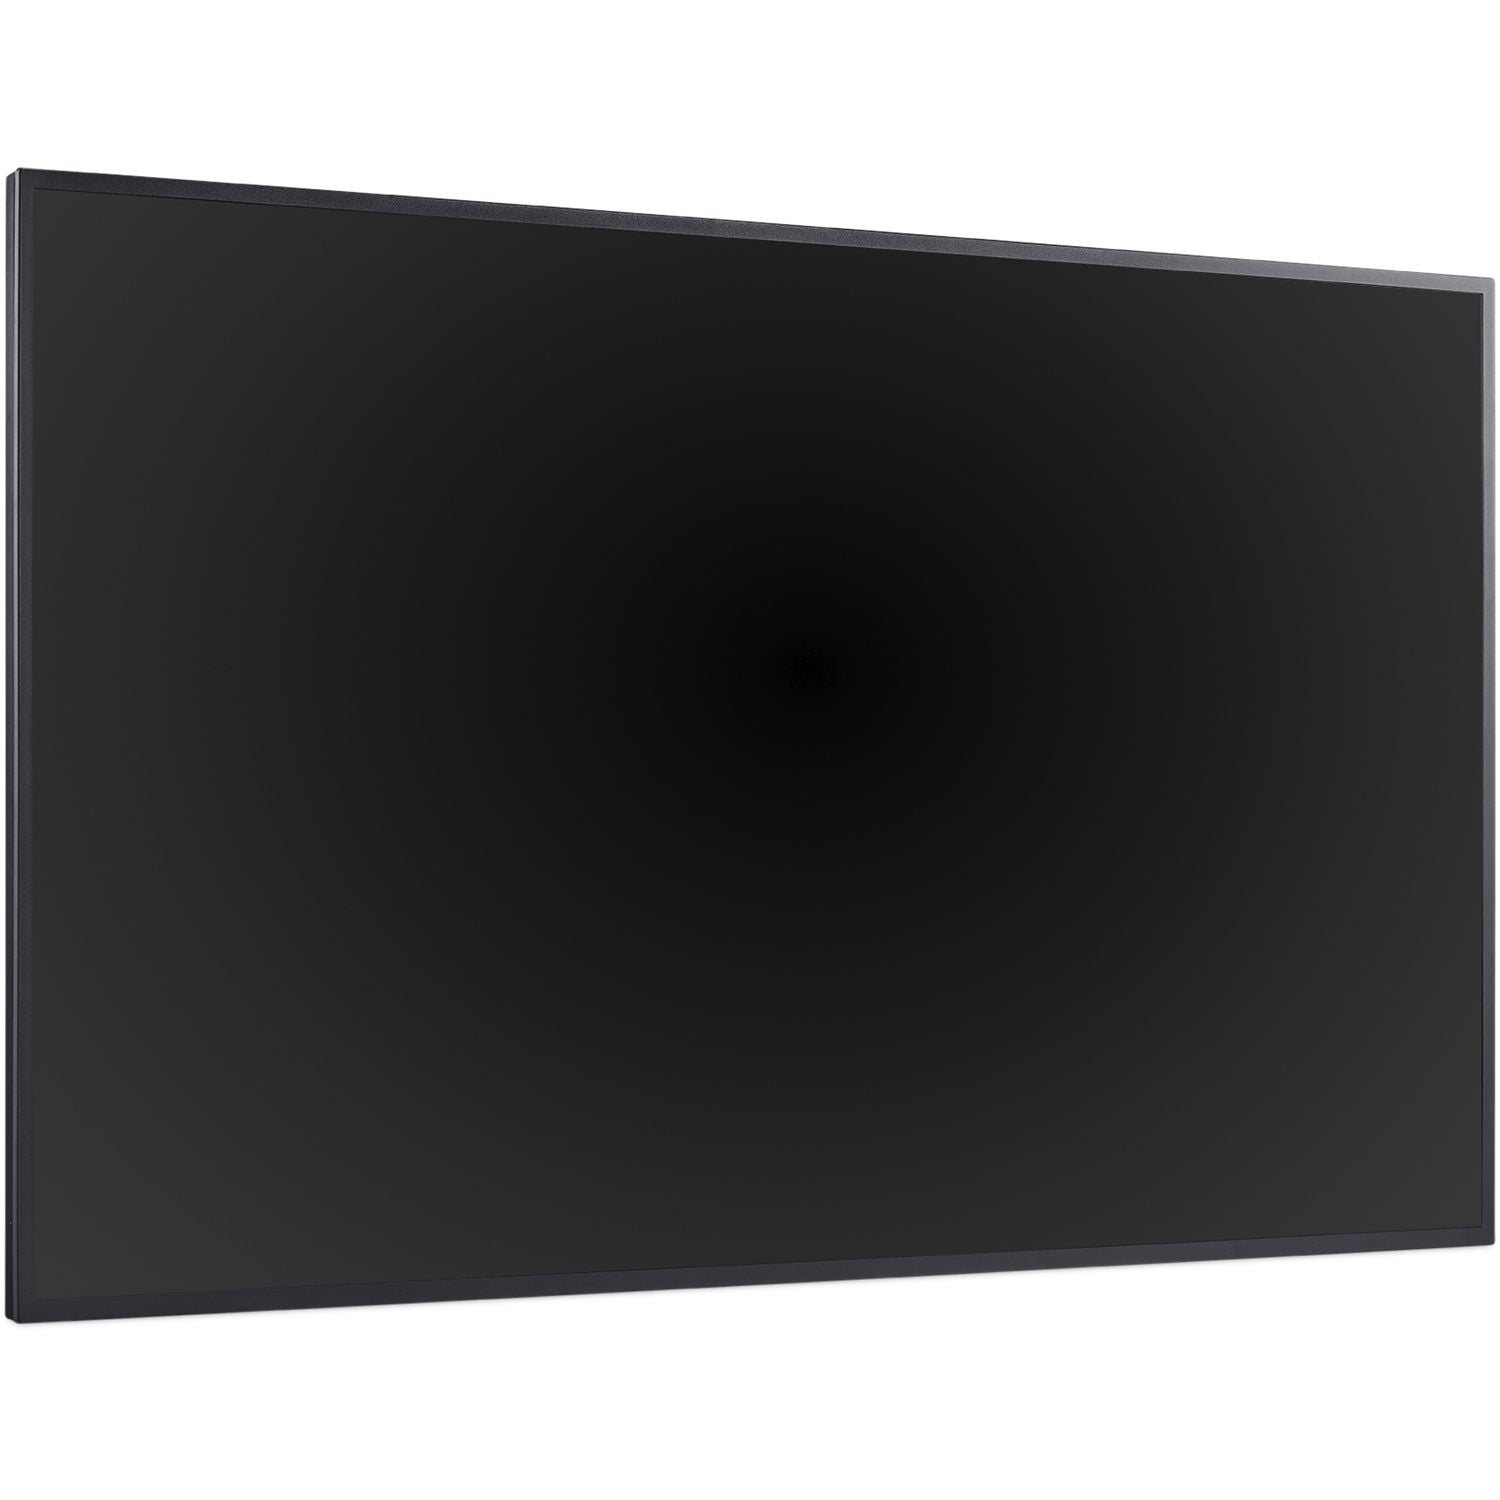 ViewSonic CDE5510-R 55" 4K UHD Quad-Core CPU Commercial Display - Certified Refurbished